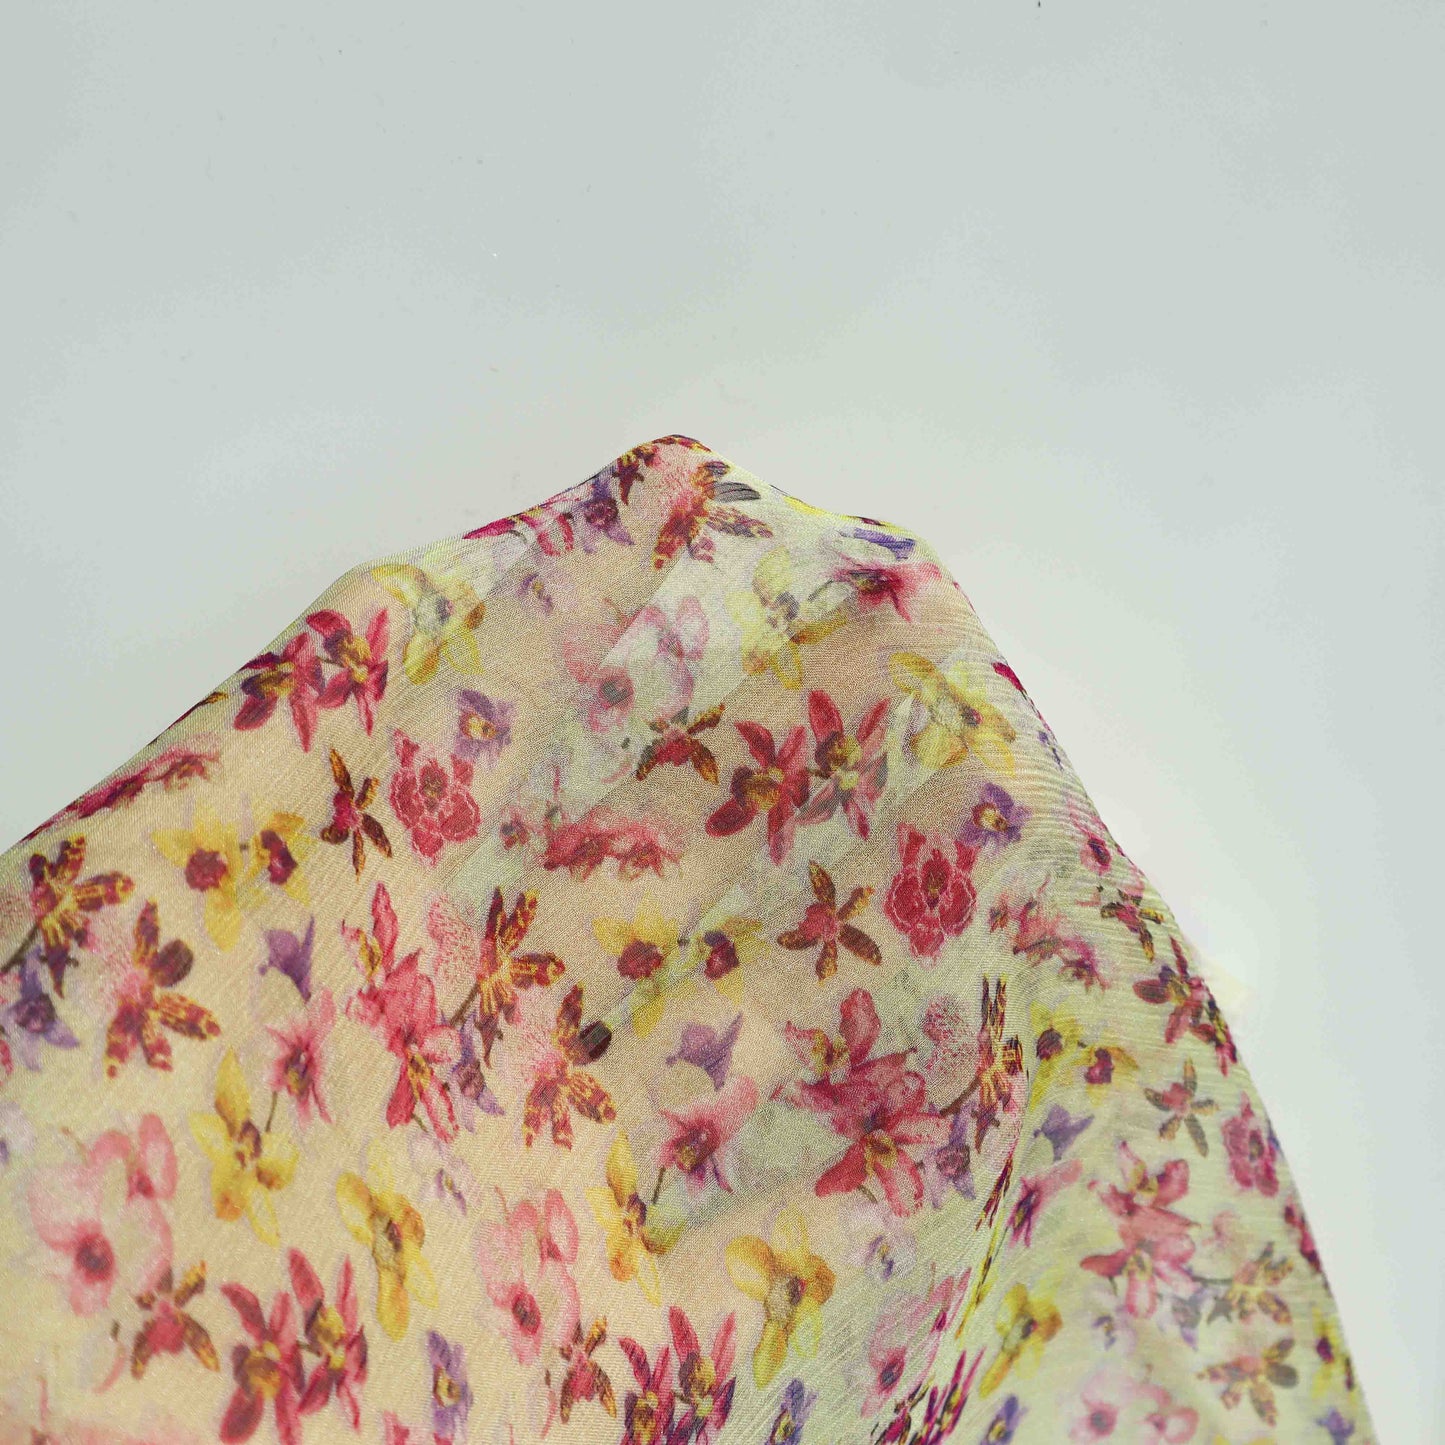 An European-made super lightweight silk chiffon with vintage Floral de minute prints. This fabric has a dry, smooth hand feel yet softens considerably after washing.